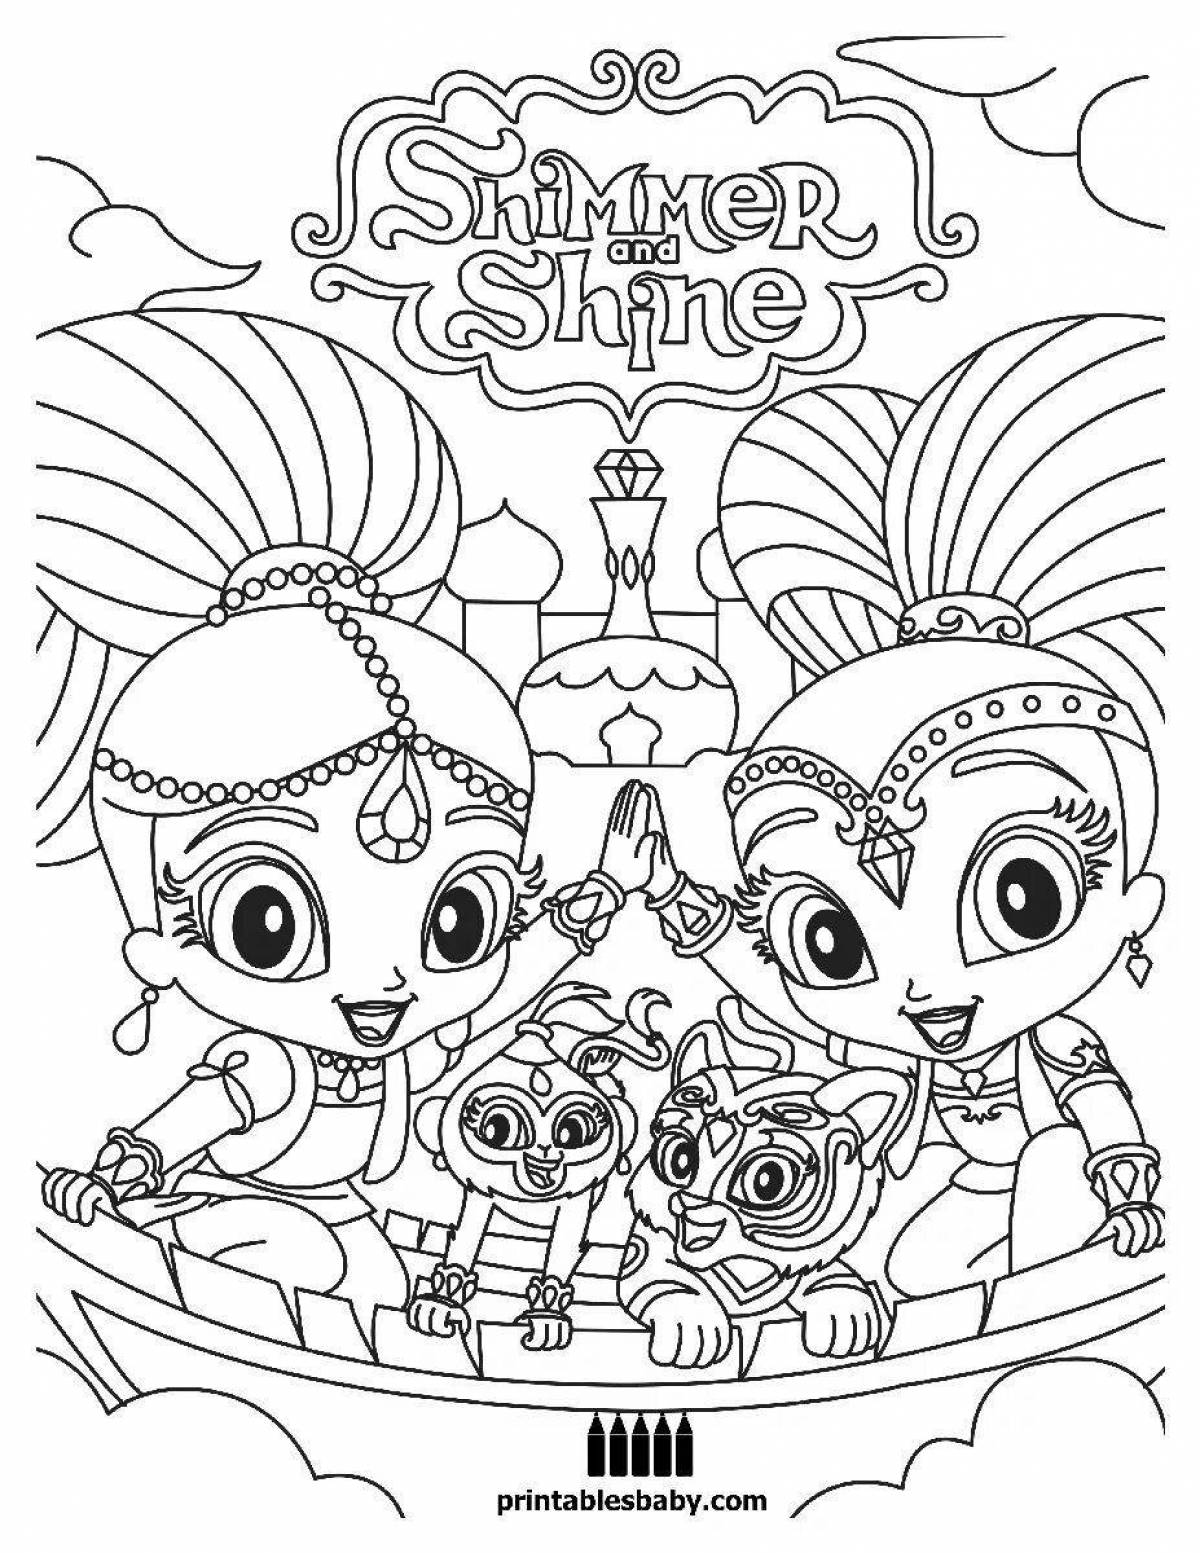 Shimmer and shine coloring book for kids